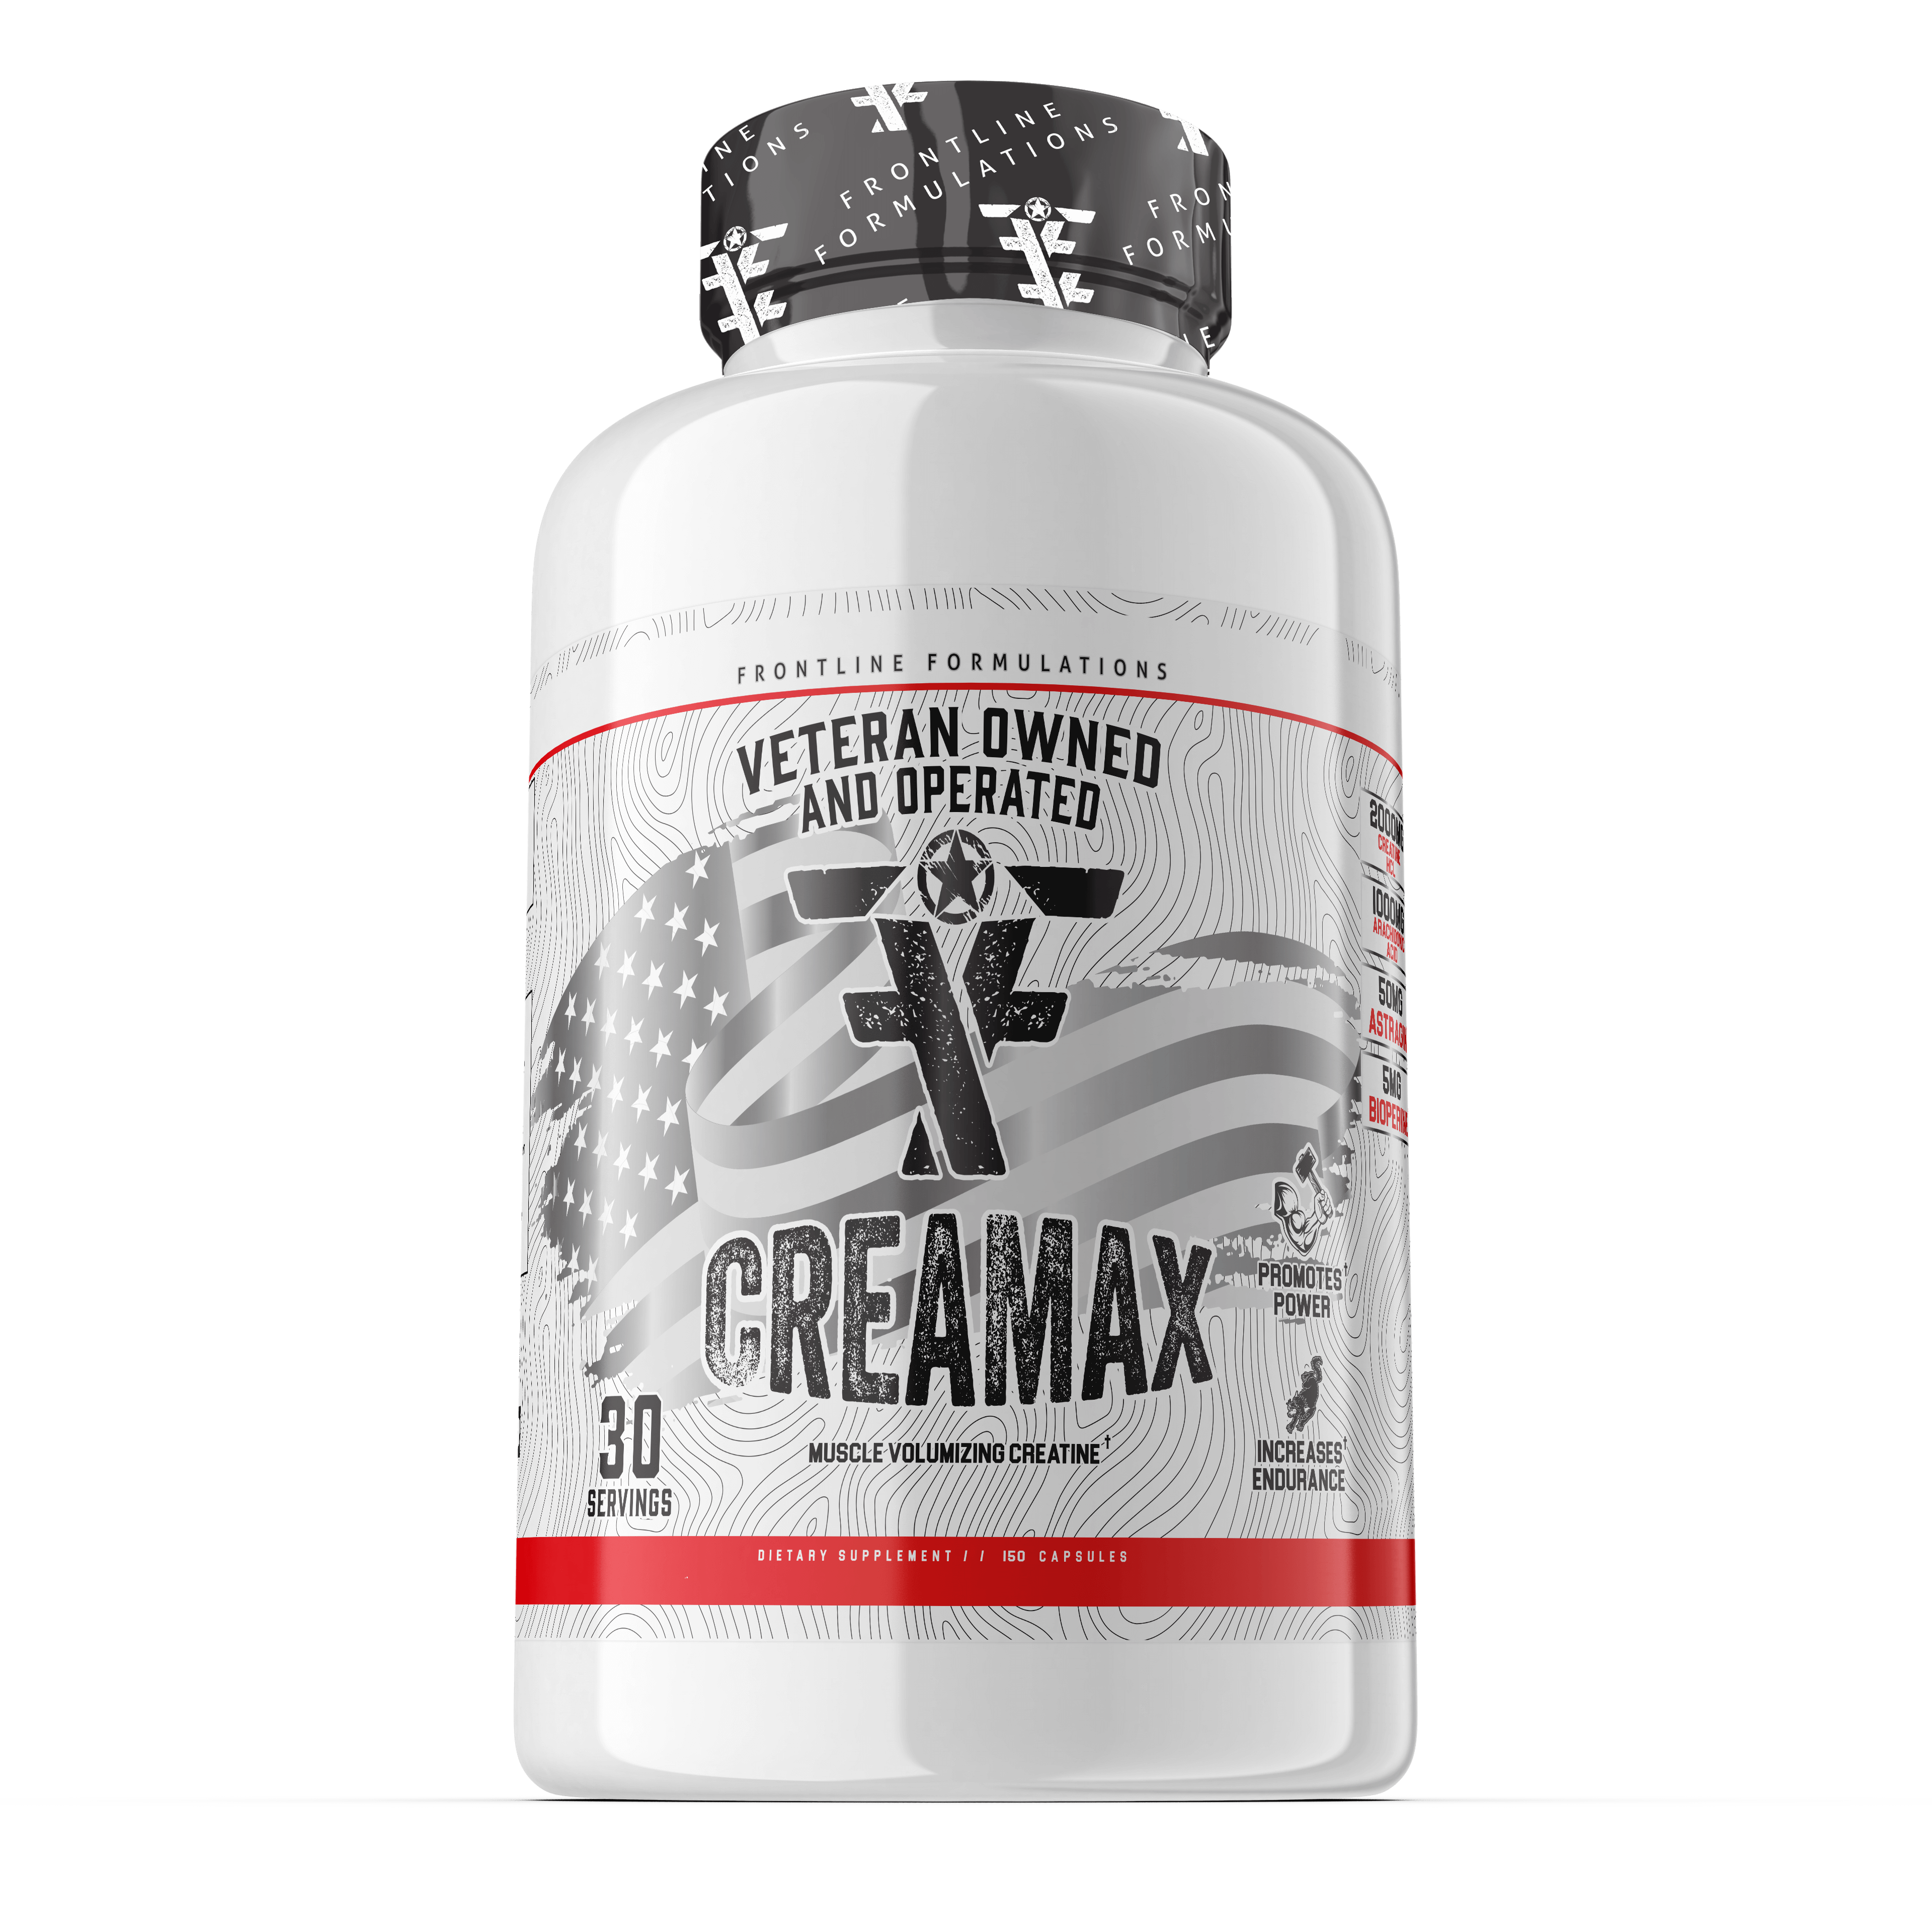 Creamax Tired of powdered creatine? Creamax has you covered and will even add some volumization for juicier pumps! Creatine HCI is a soluble form of creatine, so you get the benefits of creatine without the bloating! Arachidonic acid plays an essential ro